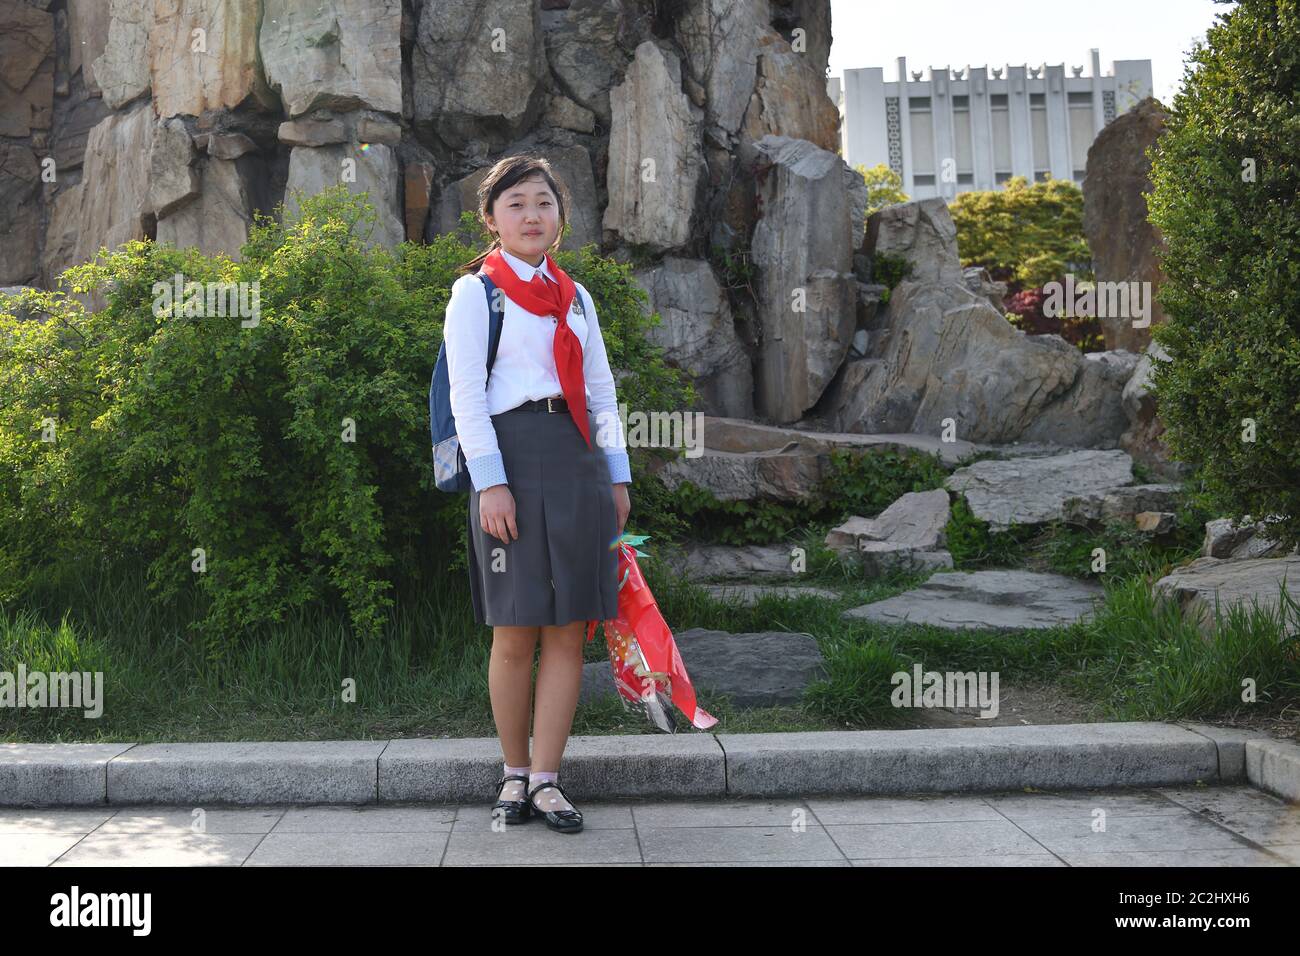 Pyongyang, North Korea - April 29, 2019: Young girl, member of the Korean Children's Union KCU, Young Pioneer Corps, on a city street Stock Photo